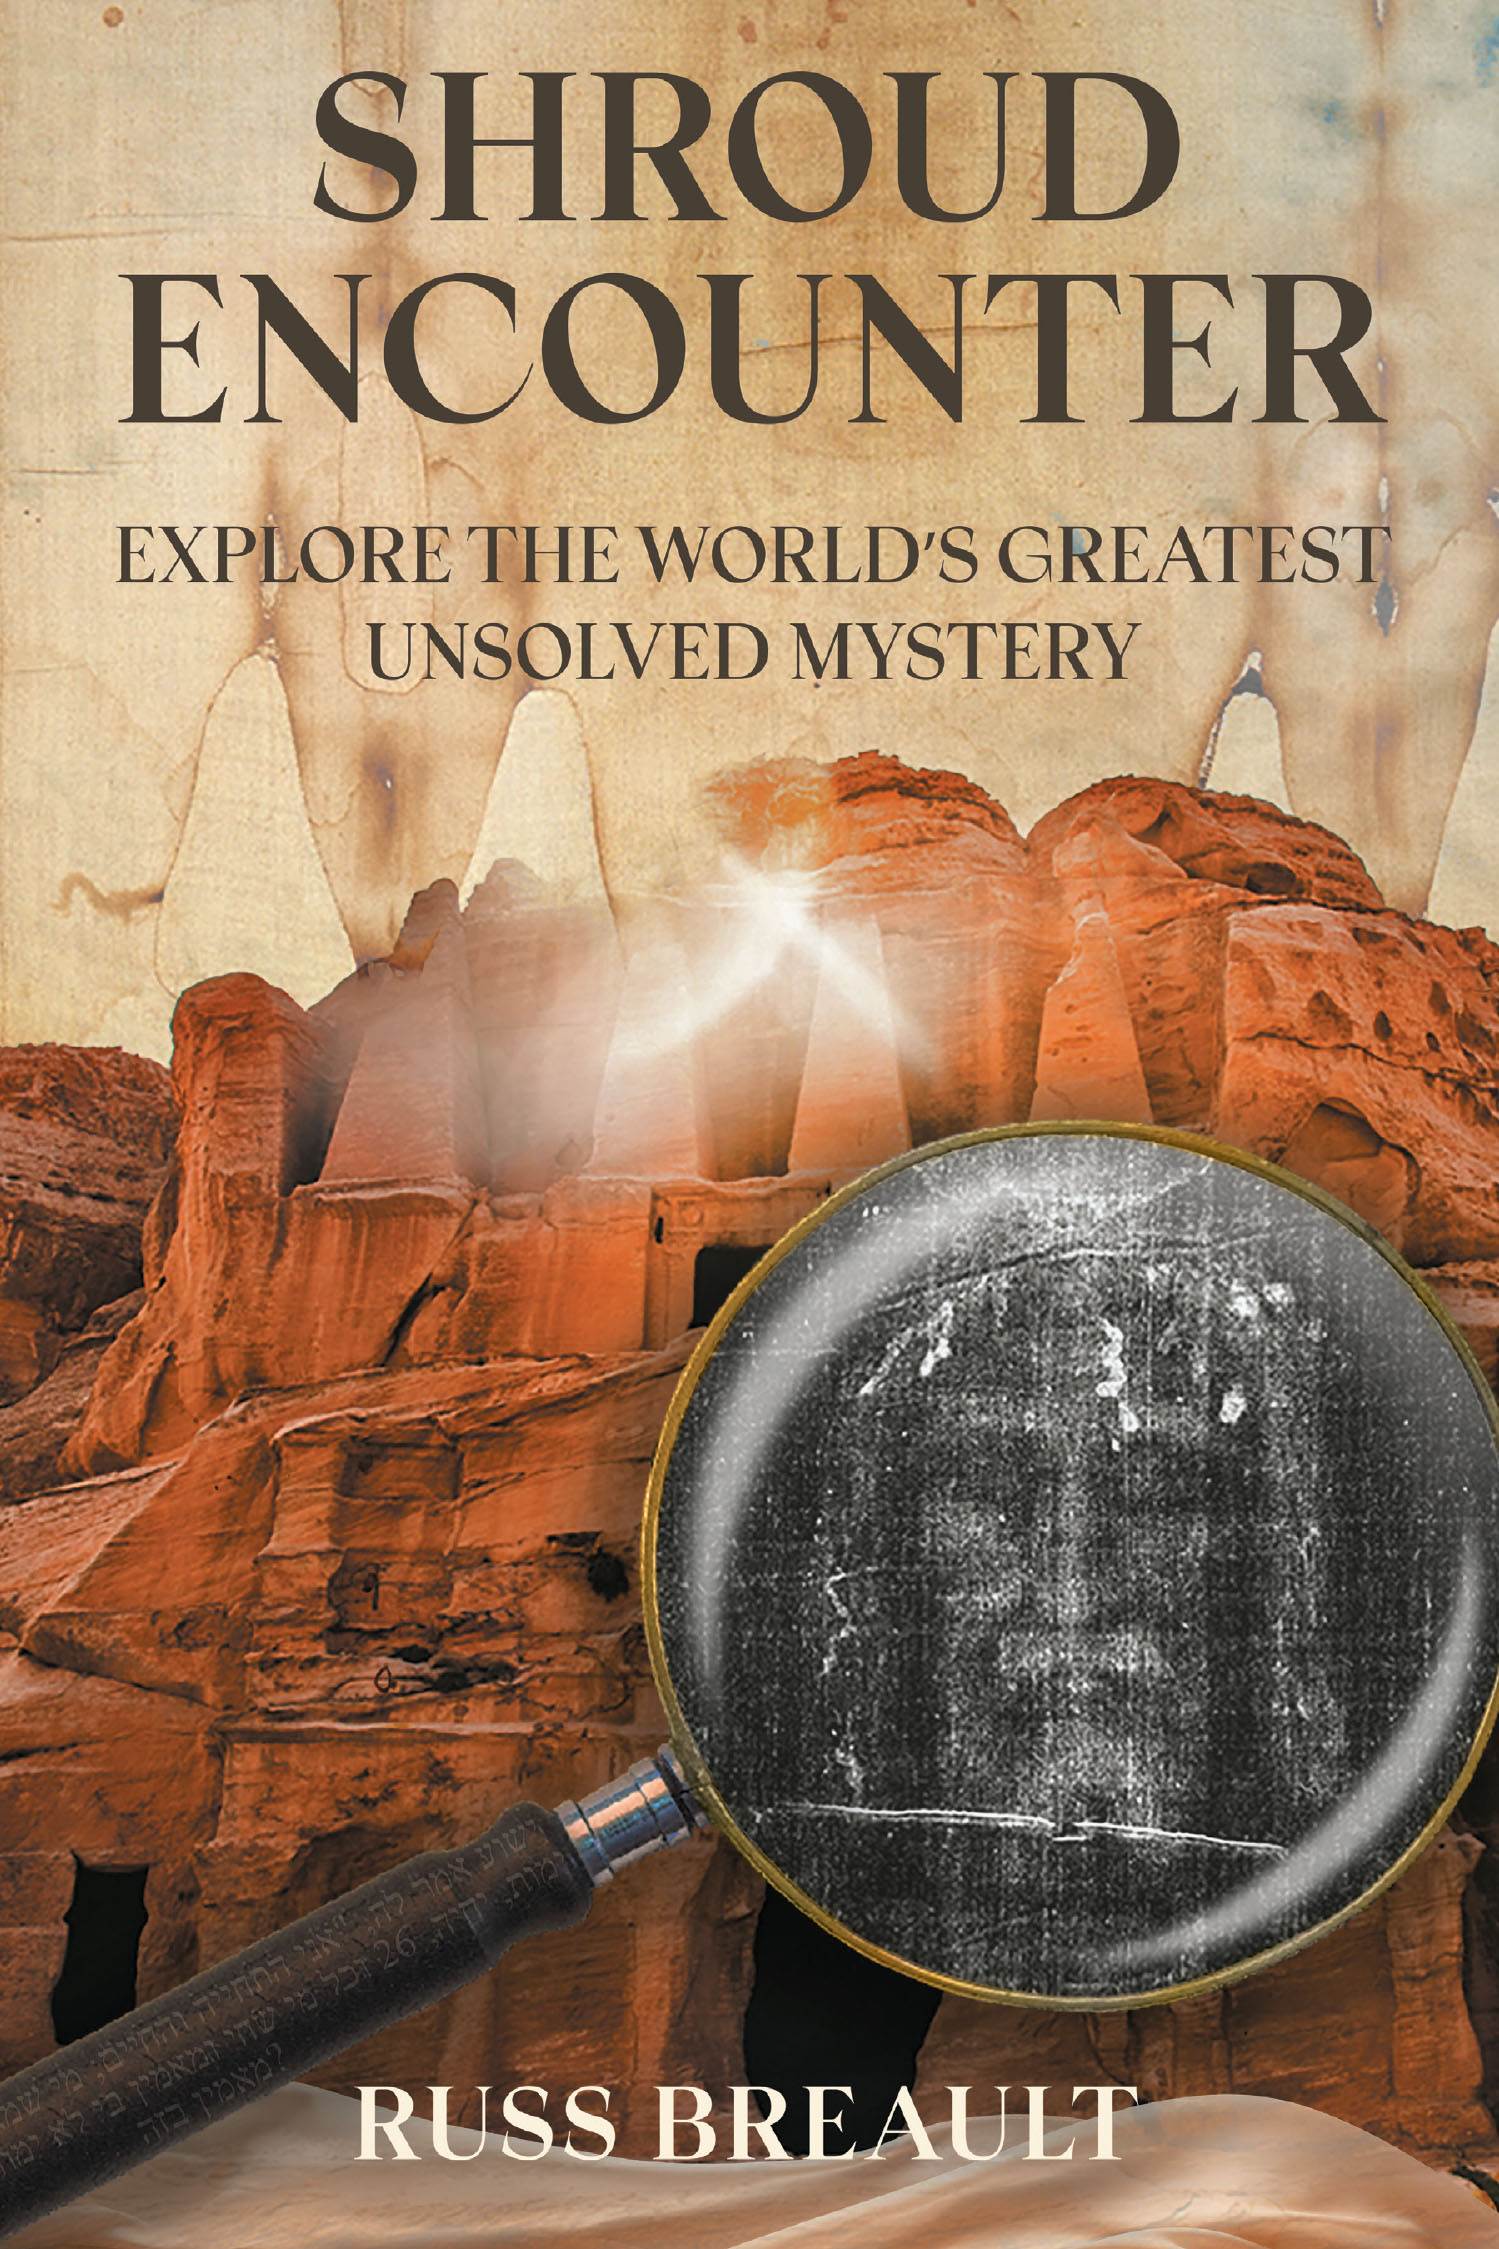 Author Russ Breault’s New Book, "Shroud Encounter," Offers a Compelling Exploration of the Science, History, and Theological Significance of the Shroud of Turin